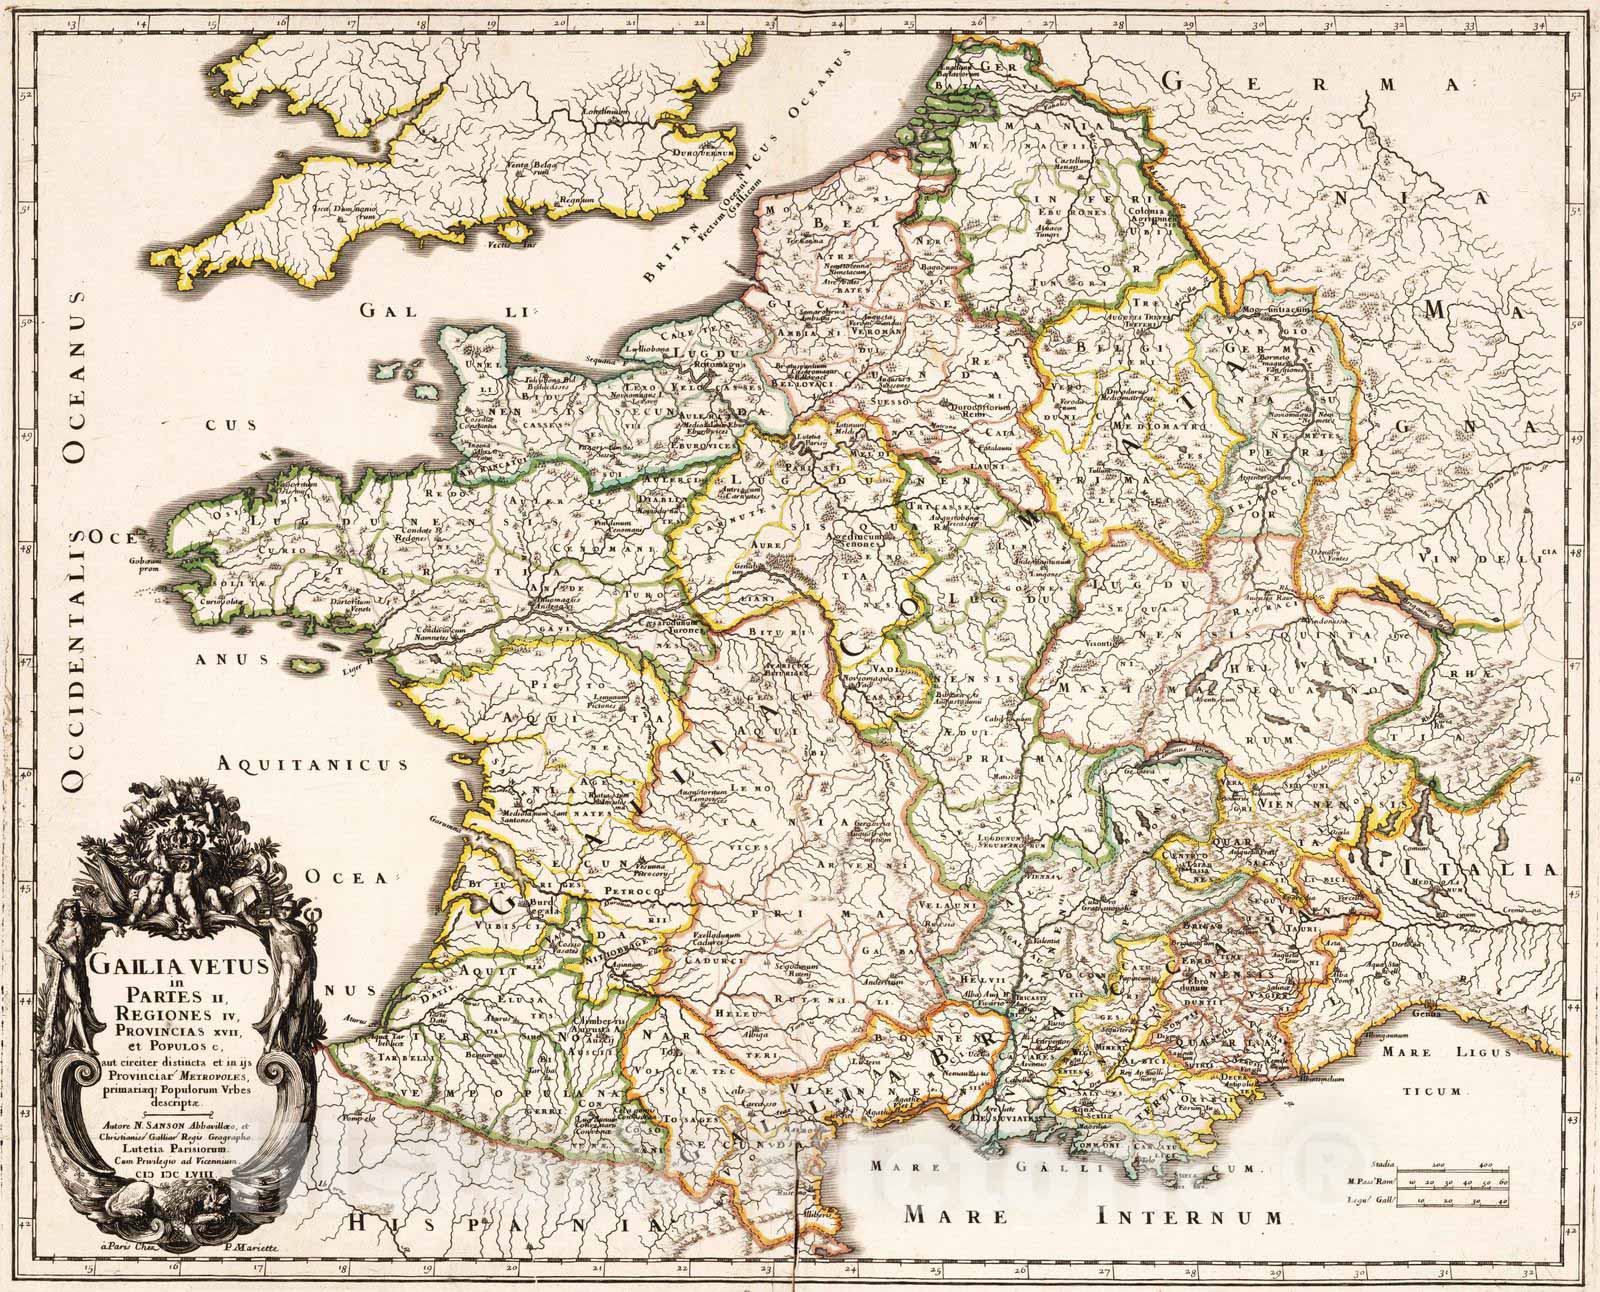 Historic Map : 1658 Divisions of Old France. - Vintage Wall Art